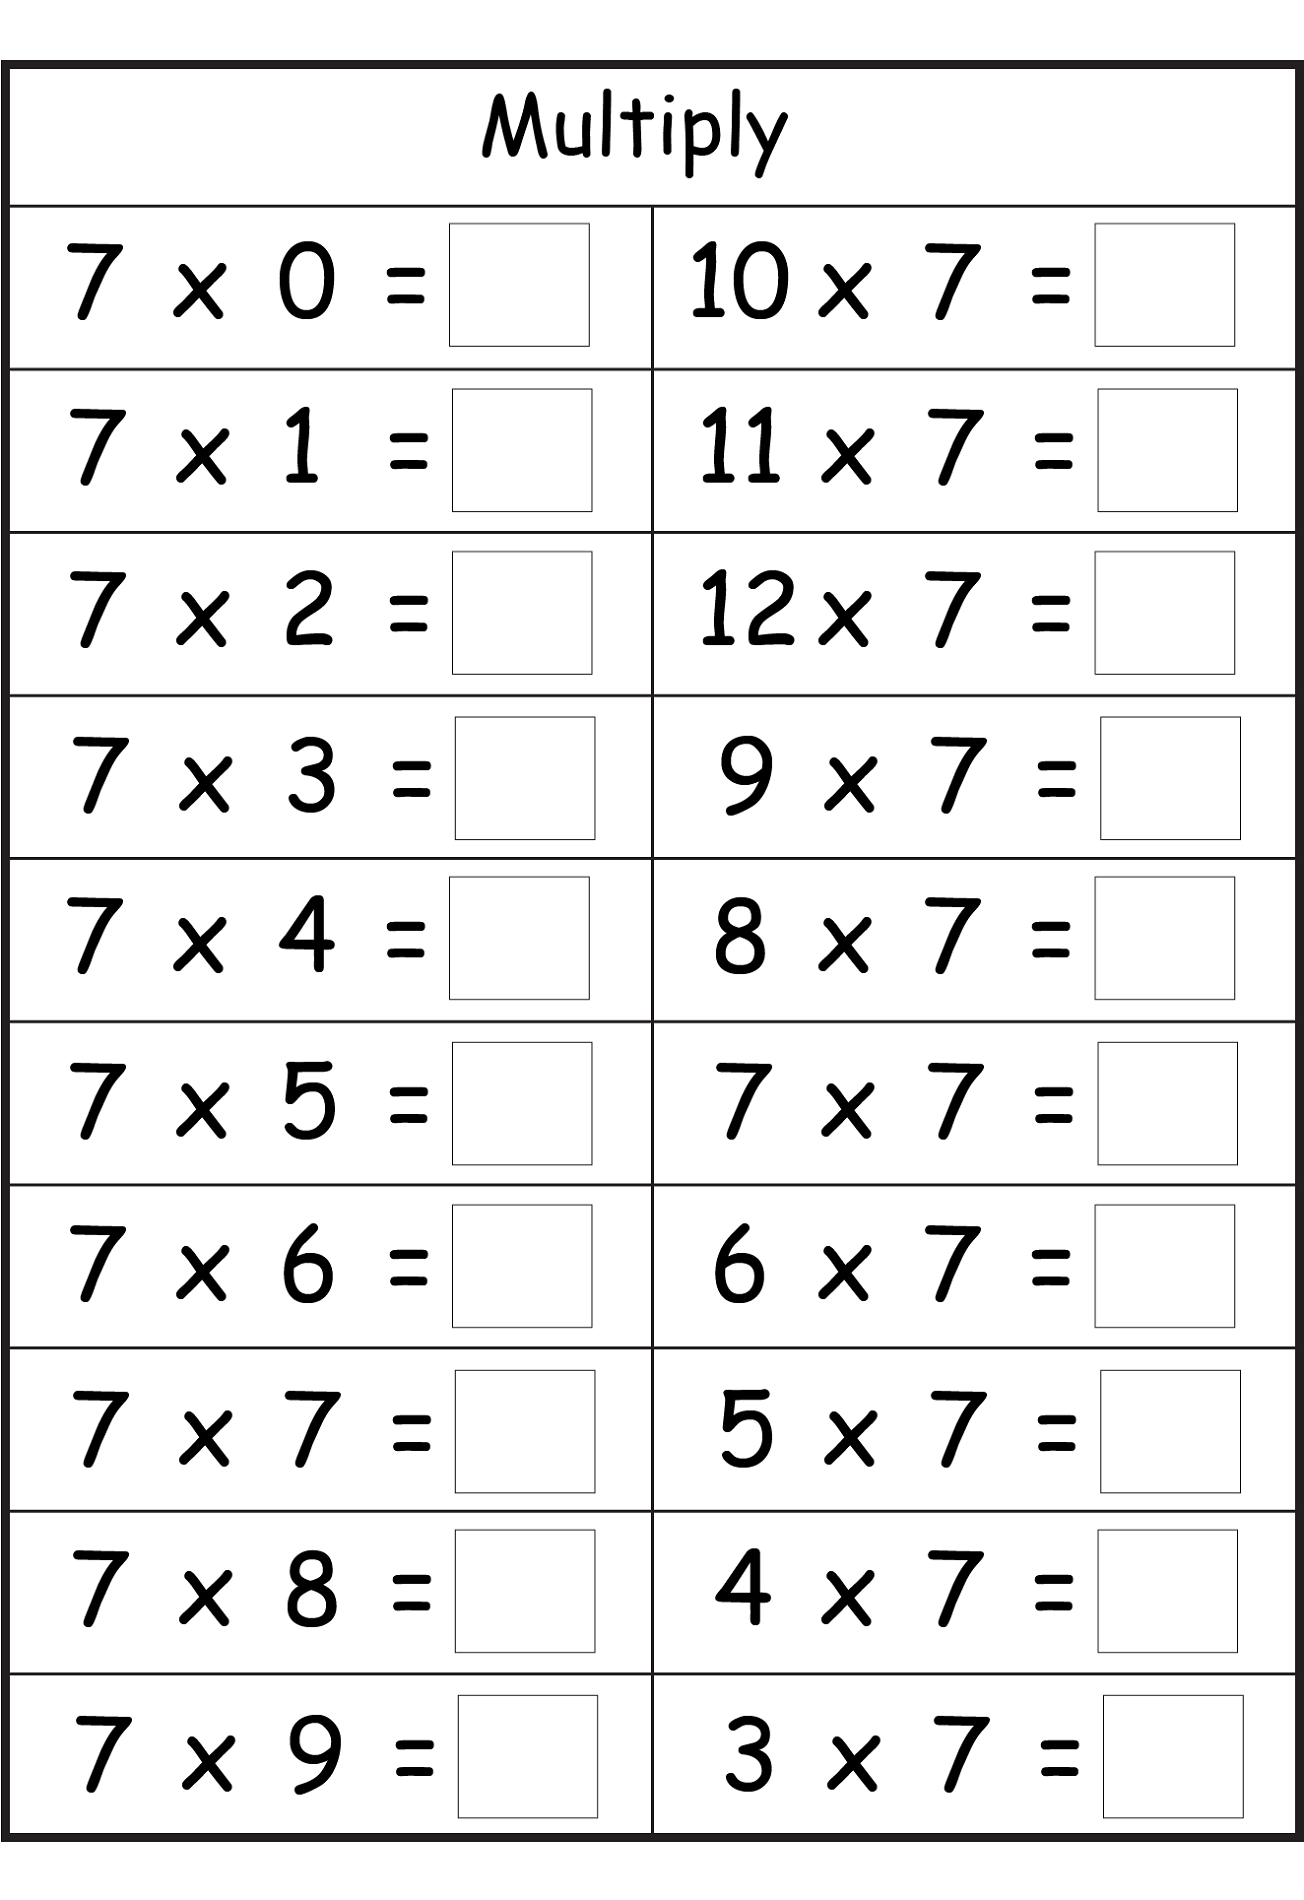 Multiplication Table Number 7 Printable 7 Times Table Chart And Practice Worksheets For